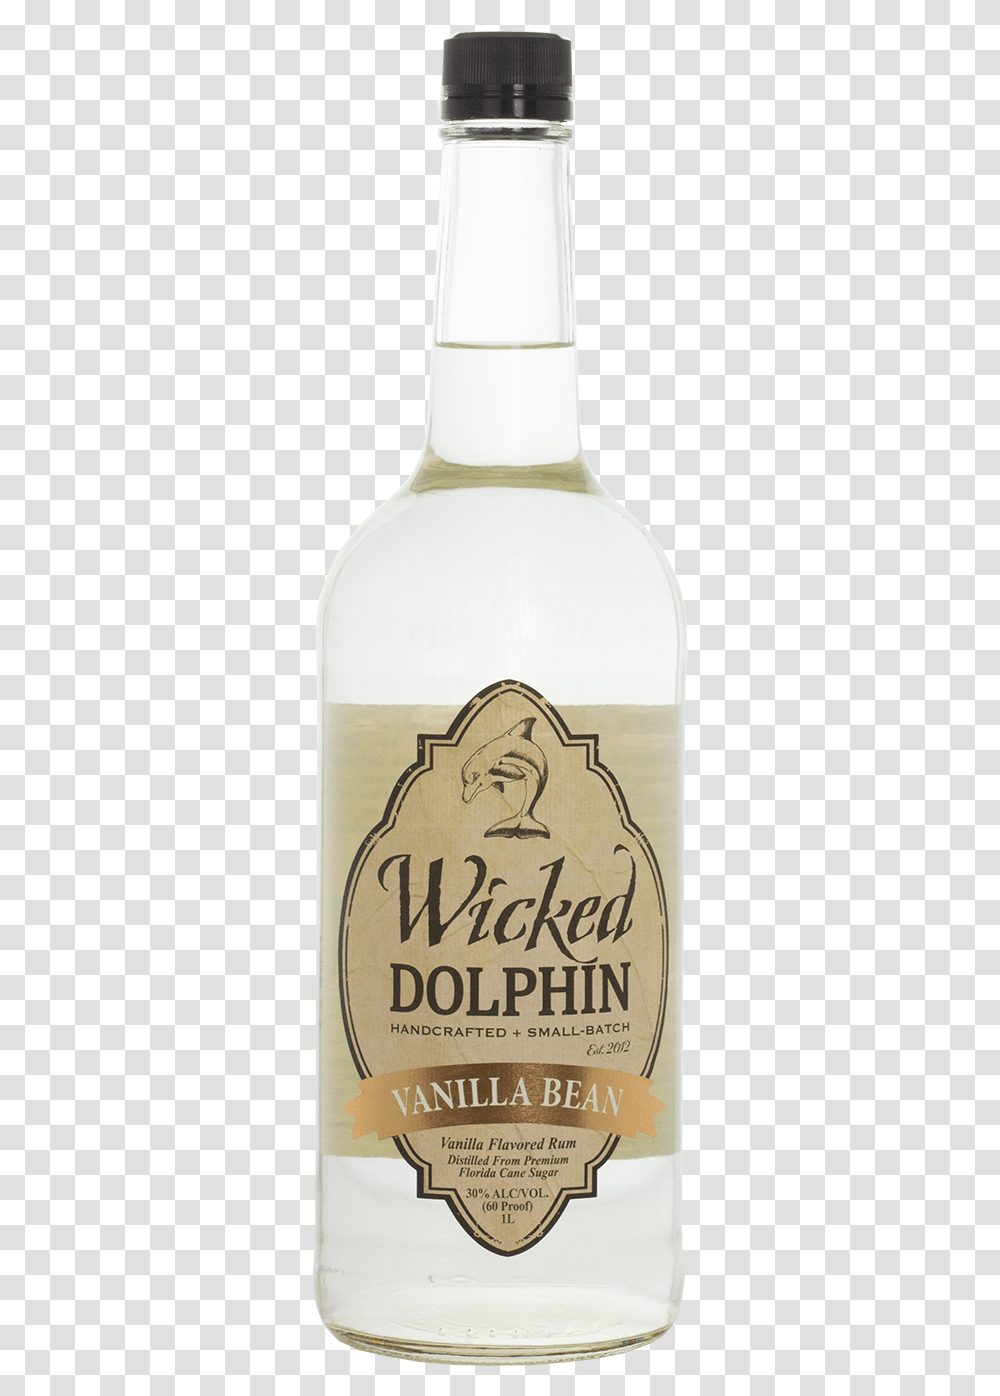 Wicked Dolphin Vanilla Rum, Liquor, Alcohol, Beverage, Drink Transparent Png